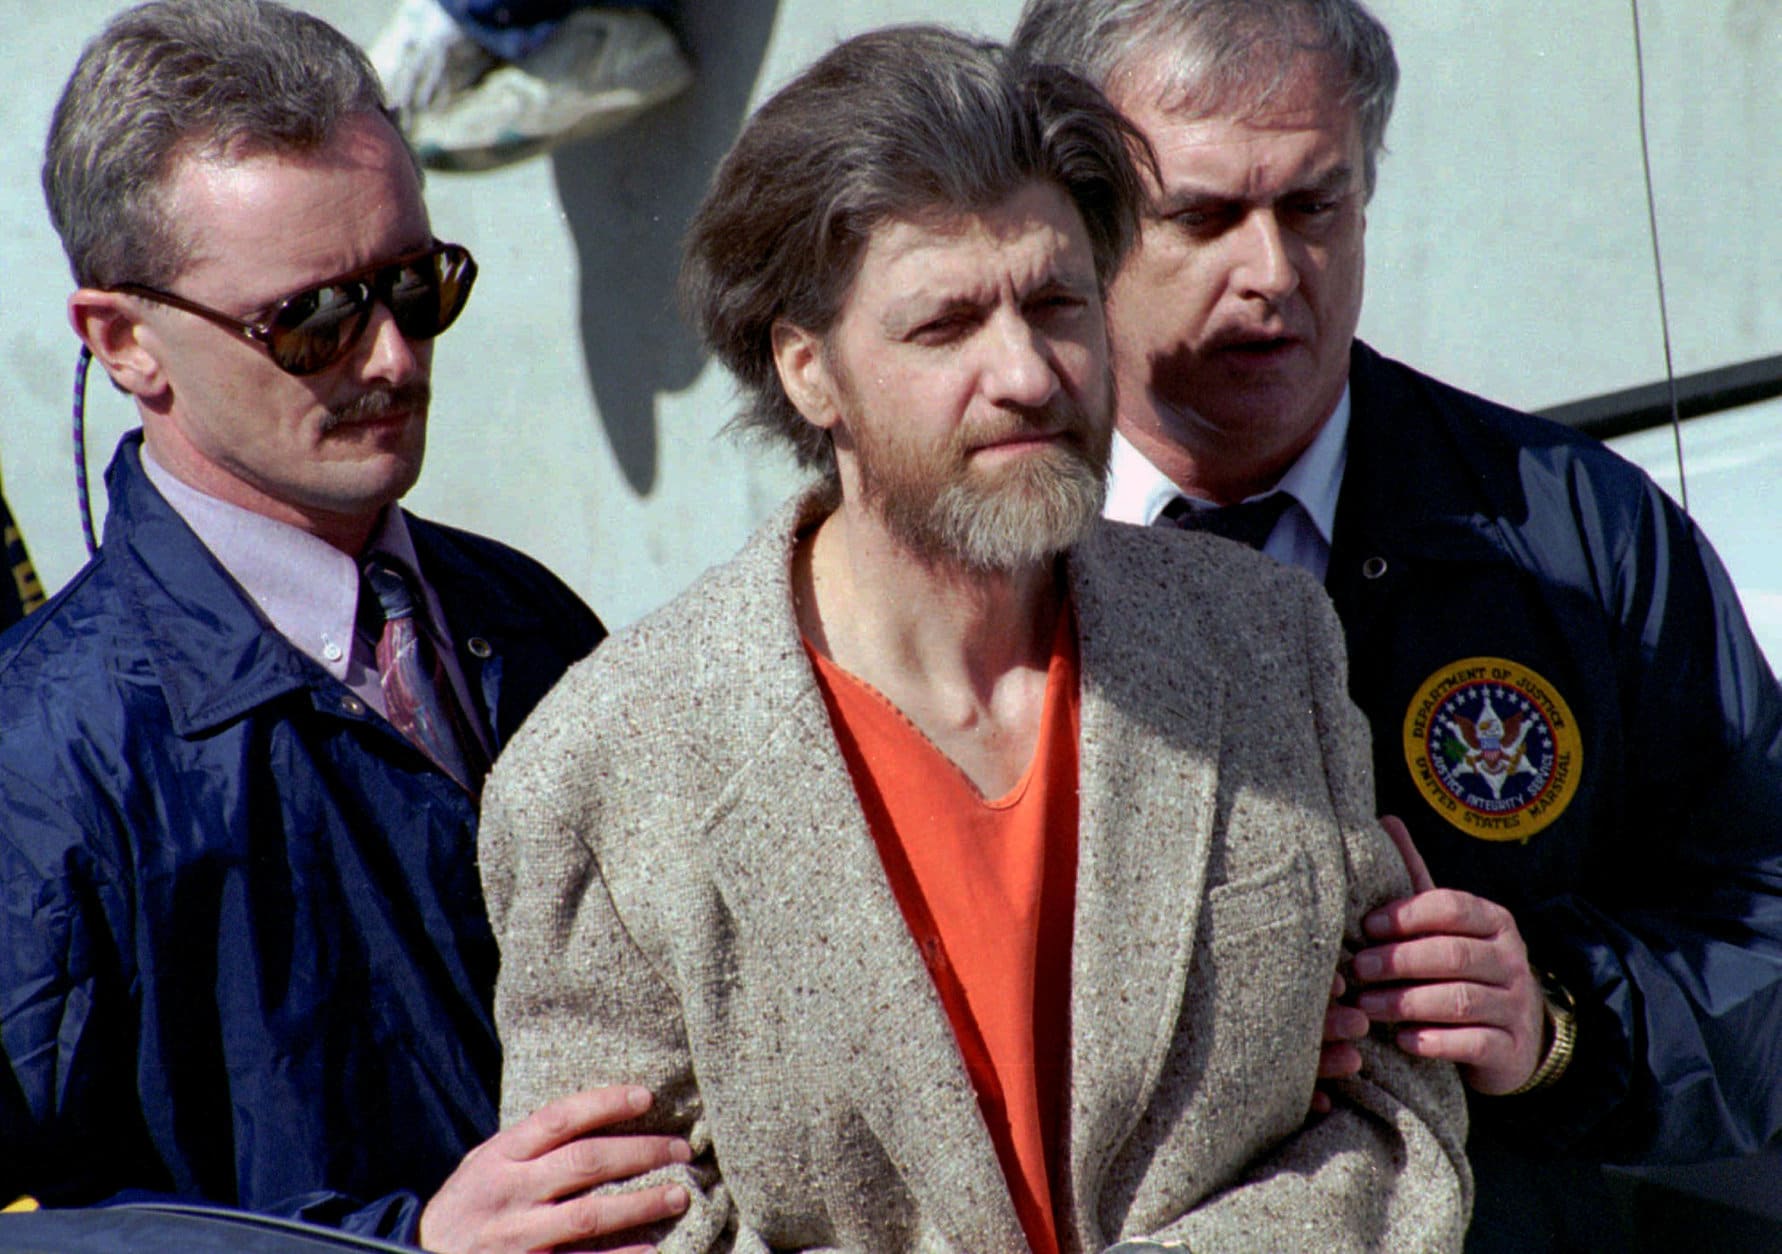 FILE - In this April 4, 1996 file photo, Ted Kaczynski, better known as the Unabomber, is flanked by federal agents as he is led to a car from the federal courthouse in Helena, Mont. Twenty years after the arrest of Kaczynski, some Lincoln residents remember him as an odd recluse who ate rabbits and lived without electricity, while others say he had a funny, personable side. Kaczynski is serving a life sentence in a federal prison in Florence, Colorado, for a series of bombings, most through the mail, that killed three people and injured 23 others over 17 years. (AP Photo/John Youngbear, File)